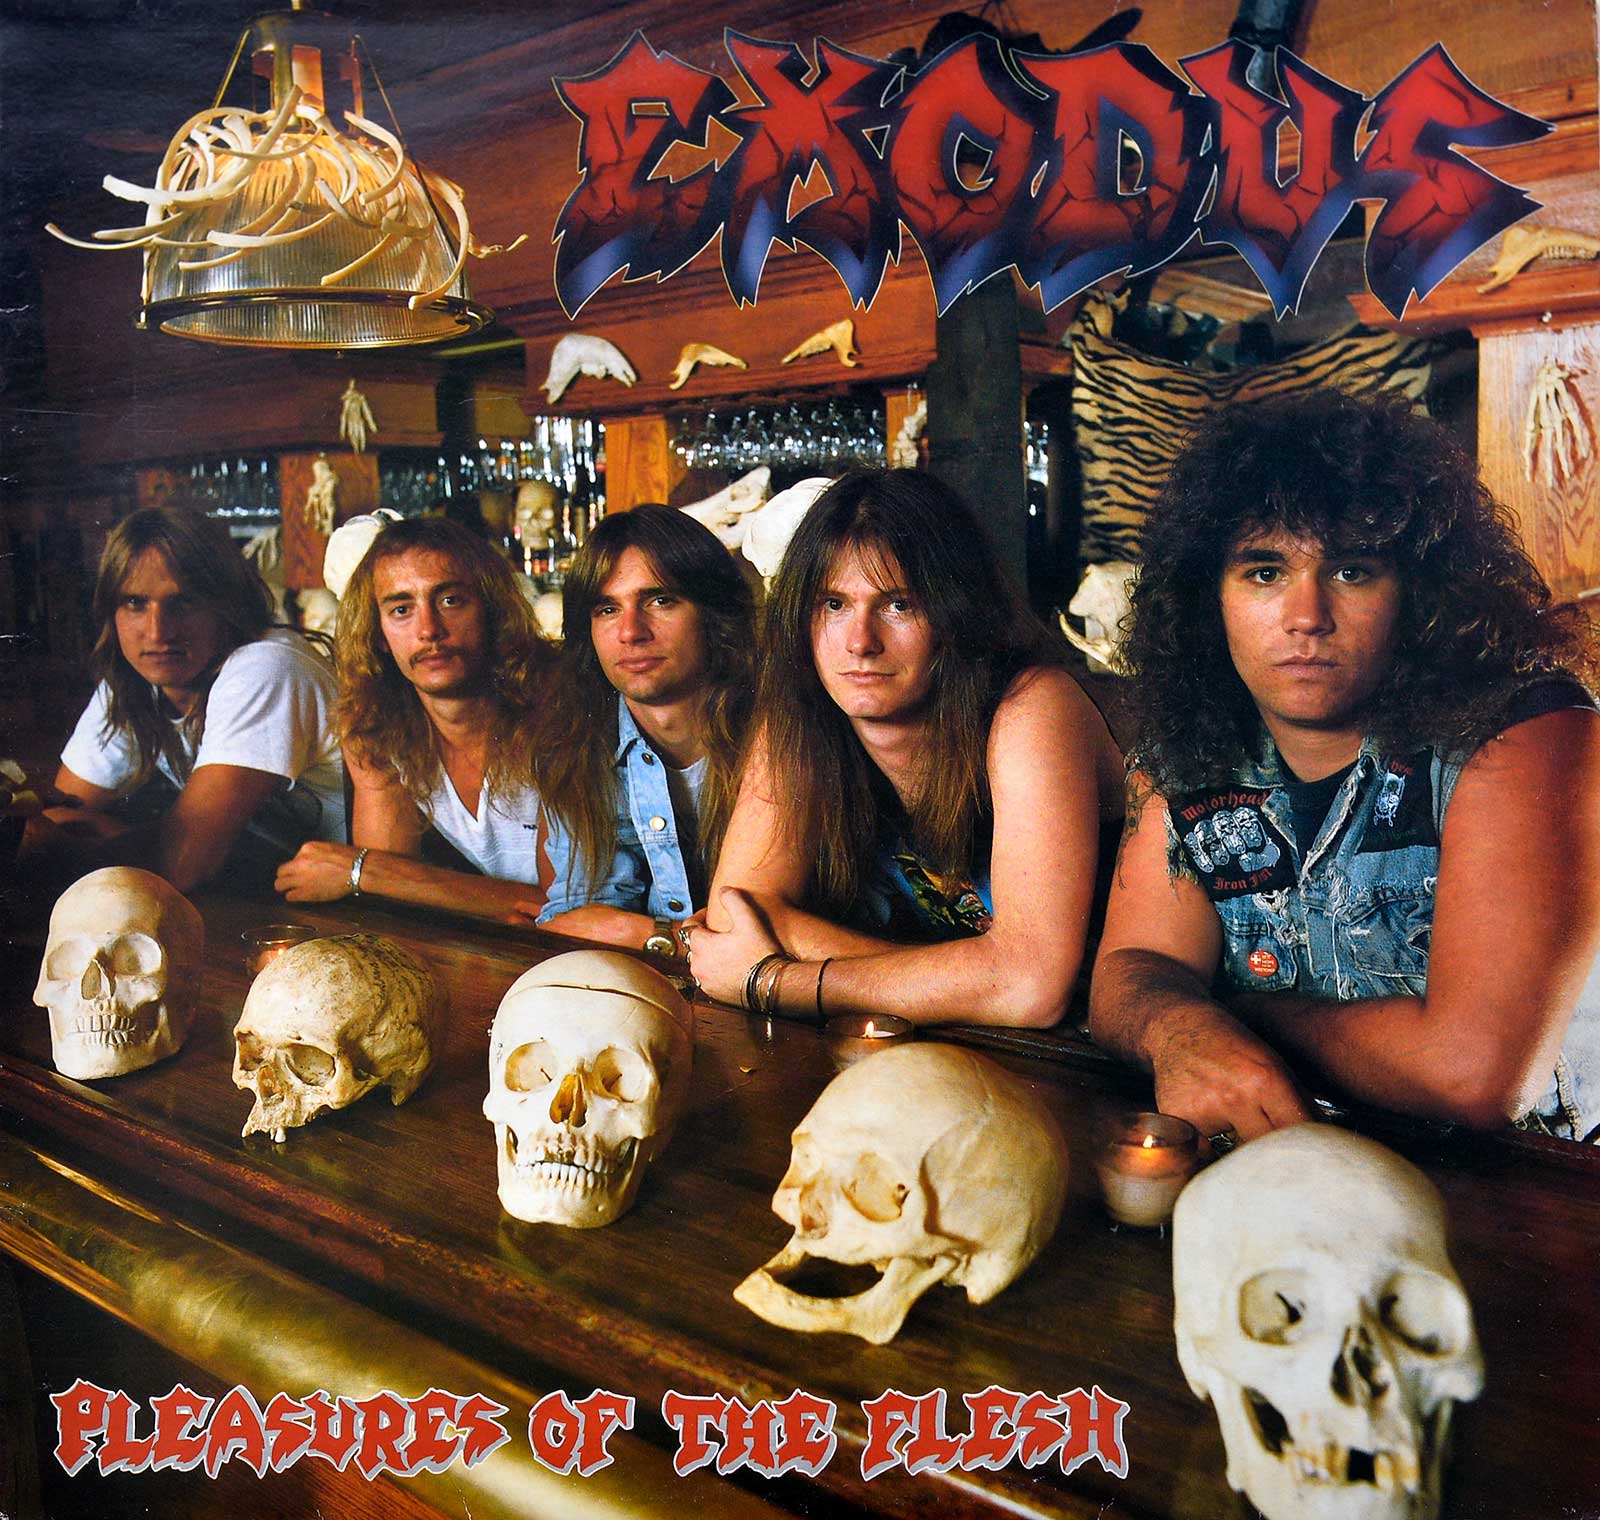 large album front cover photo of: Pleasures of the Flesh by Exodos